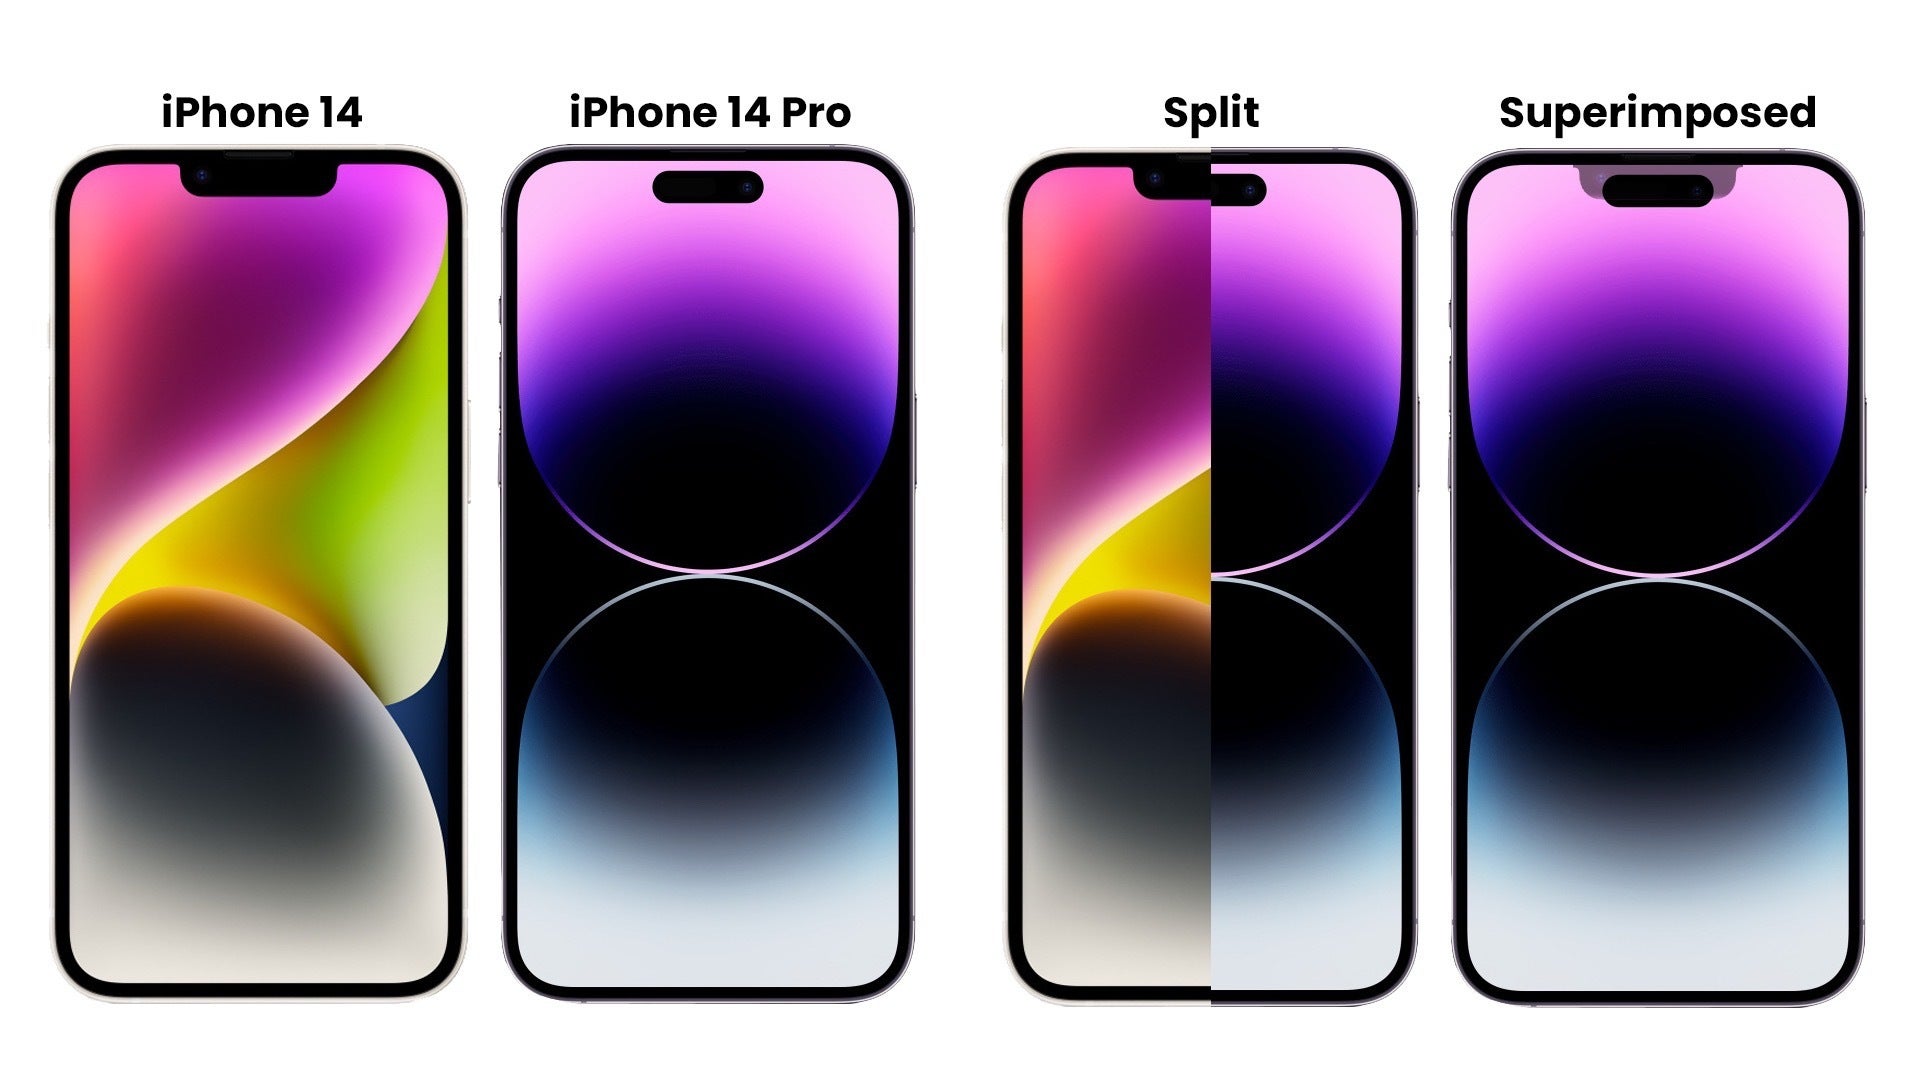 The iPhone 14 Pro’s Dynamic Island: Why it could be gone with the iPhone 16